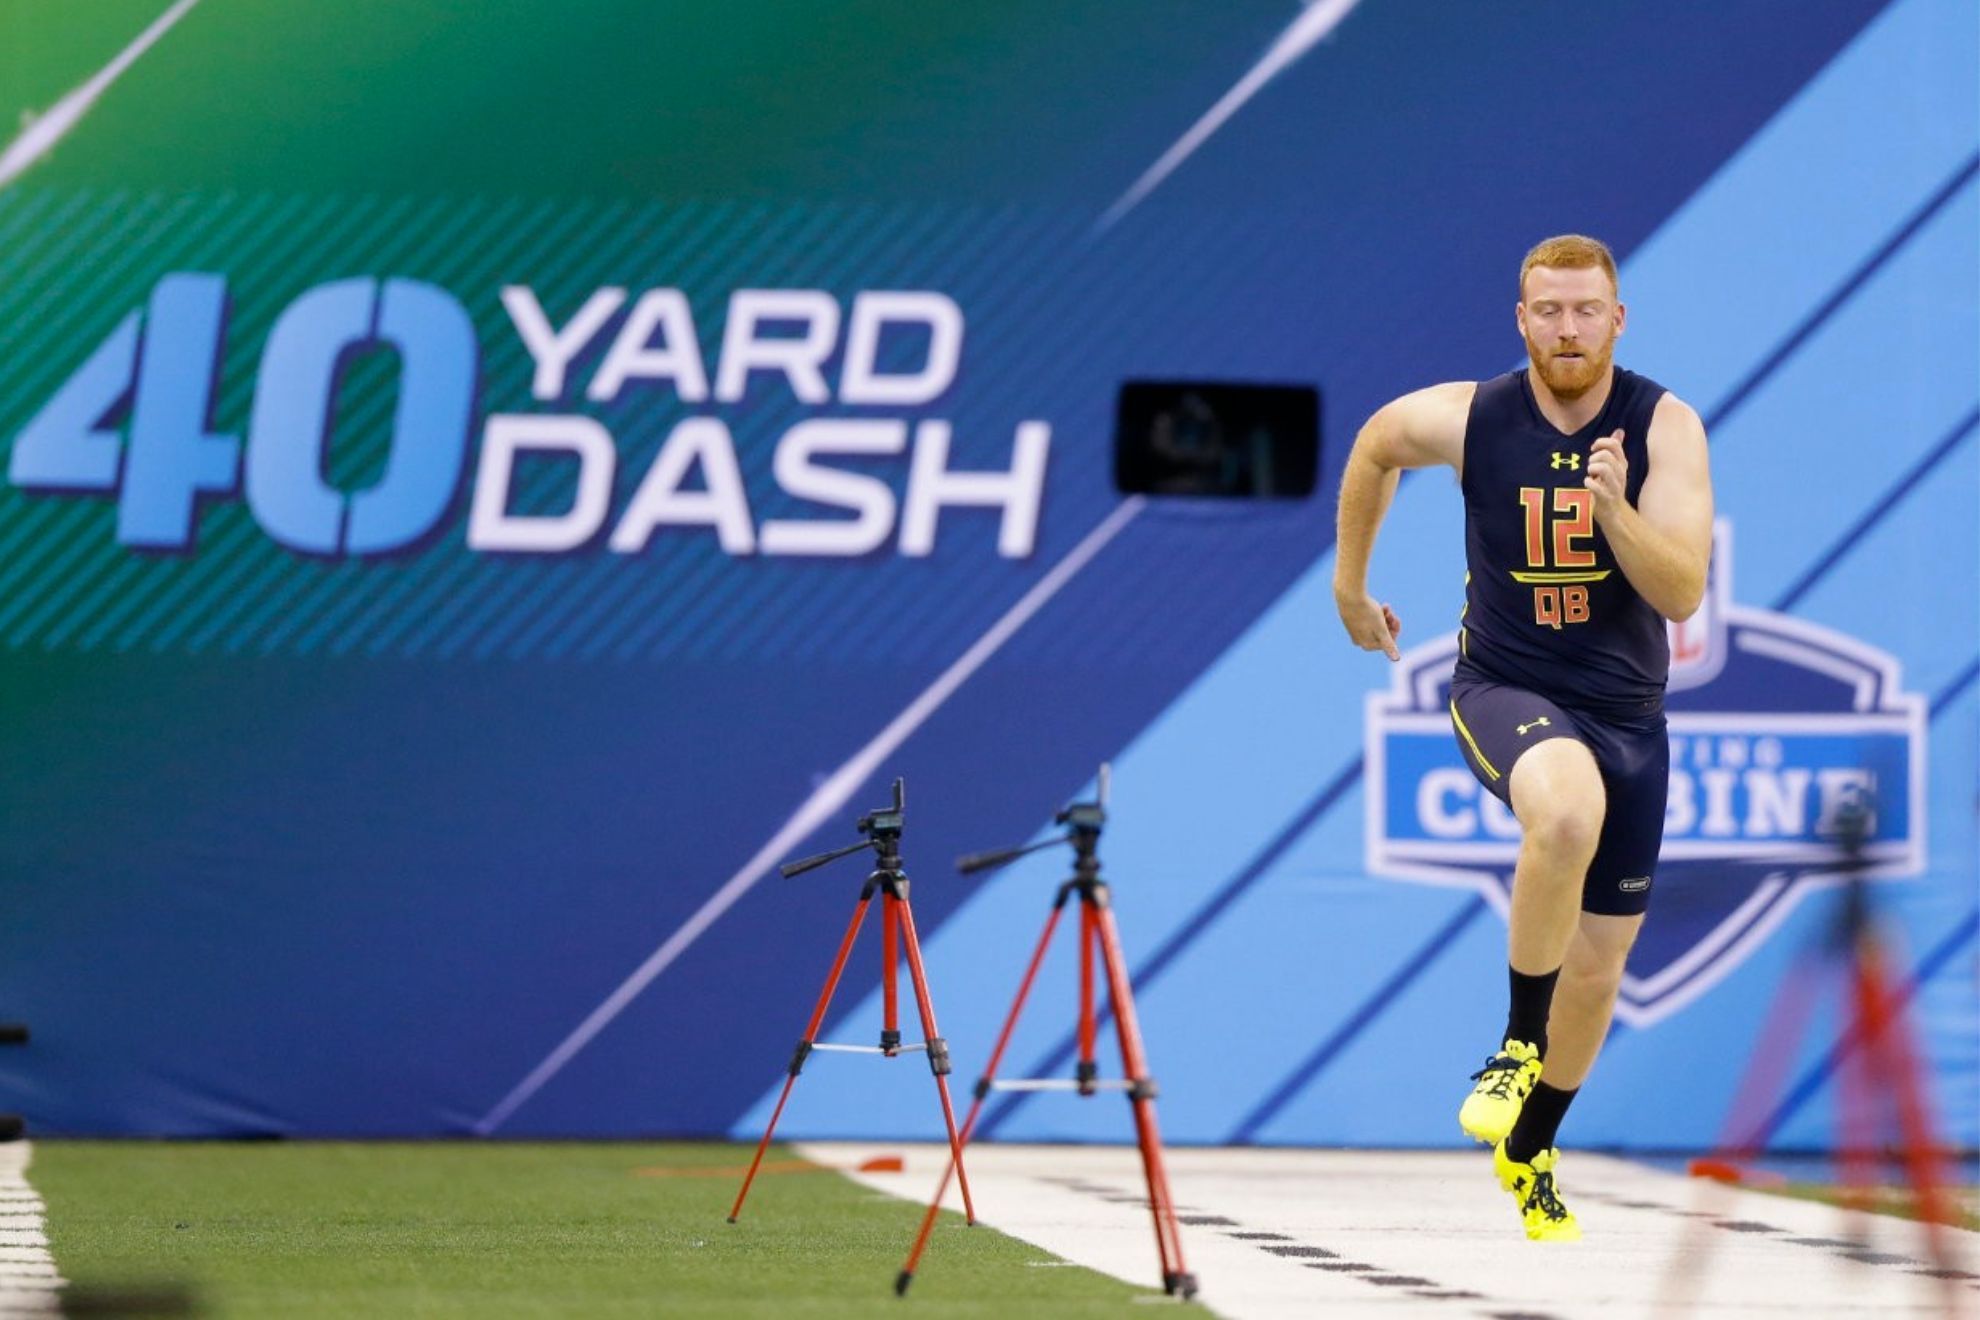 NFL Scouting Combine 2023 Schedule: Start date, workout times and TV channel